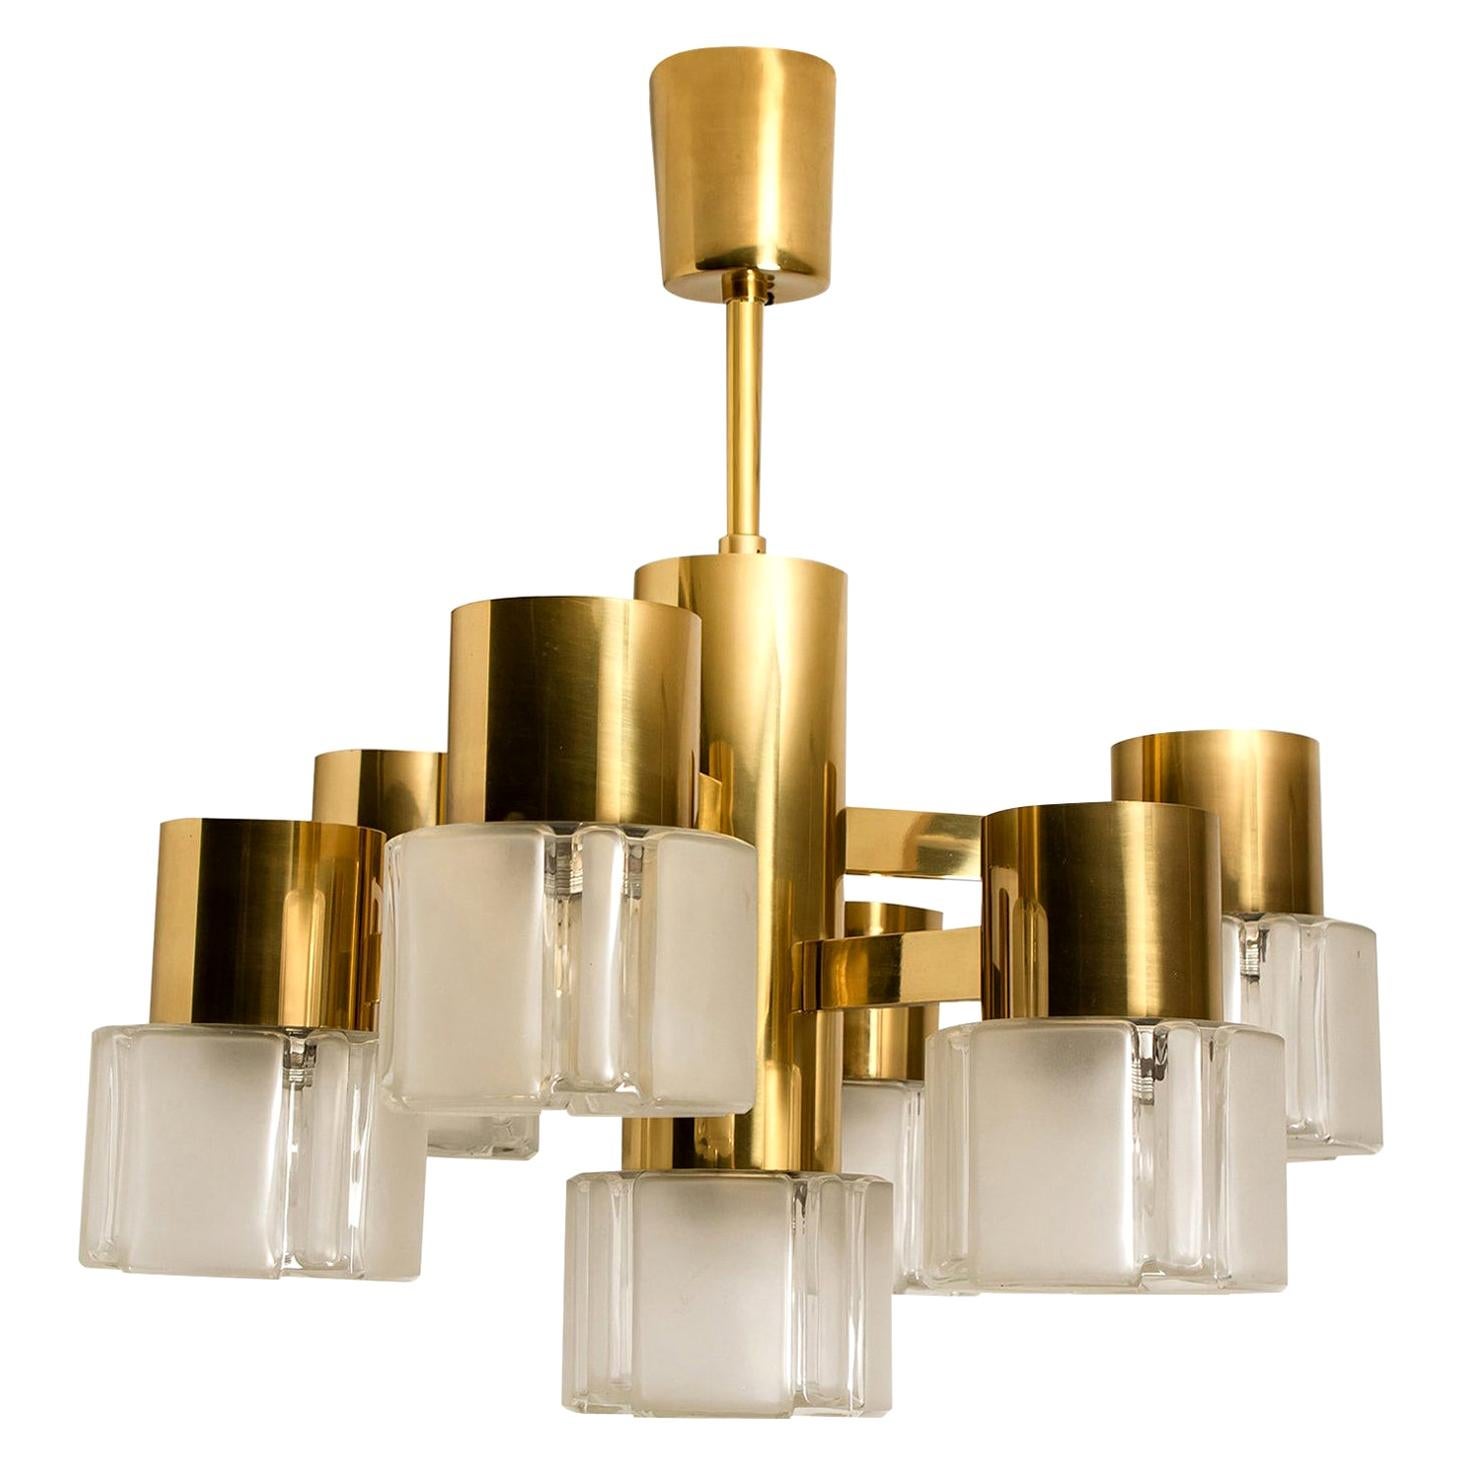 Hillebrand Chandelier Matt and Clear Glass Shades and Brass, circa 1970s Germany For Sale